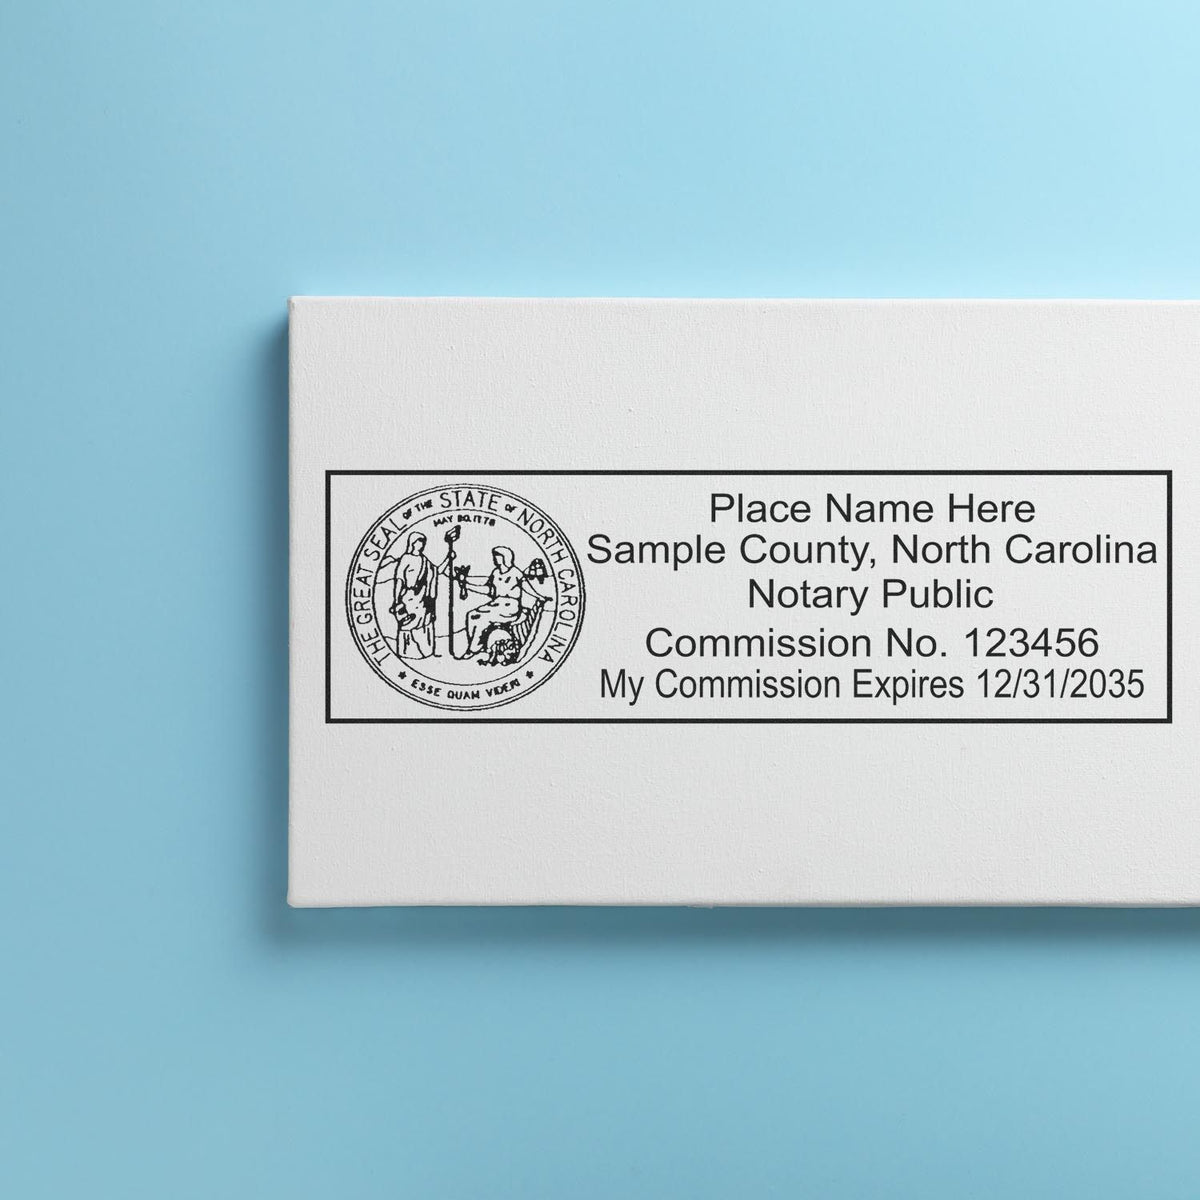 Another Example of a stamped impression of the Heavy-Duty North Carolina Rectangular Notary Stamp on a piece of office paper.